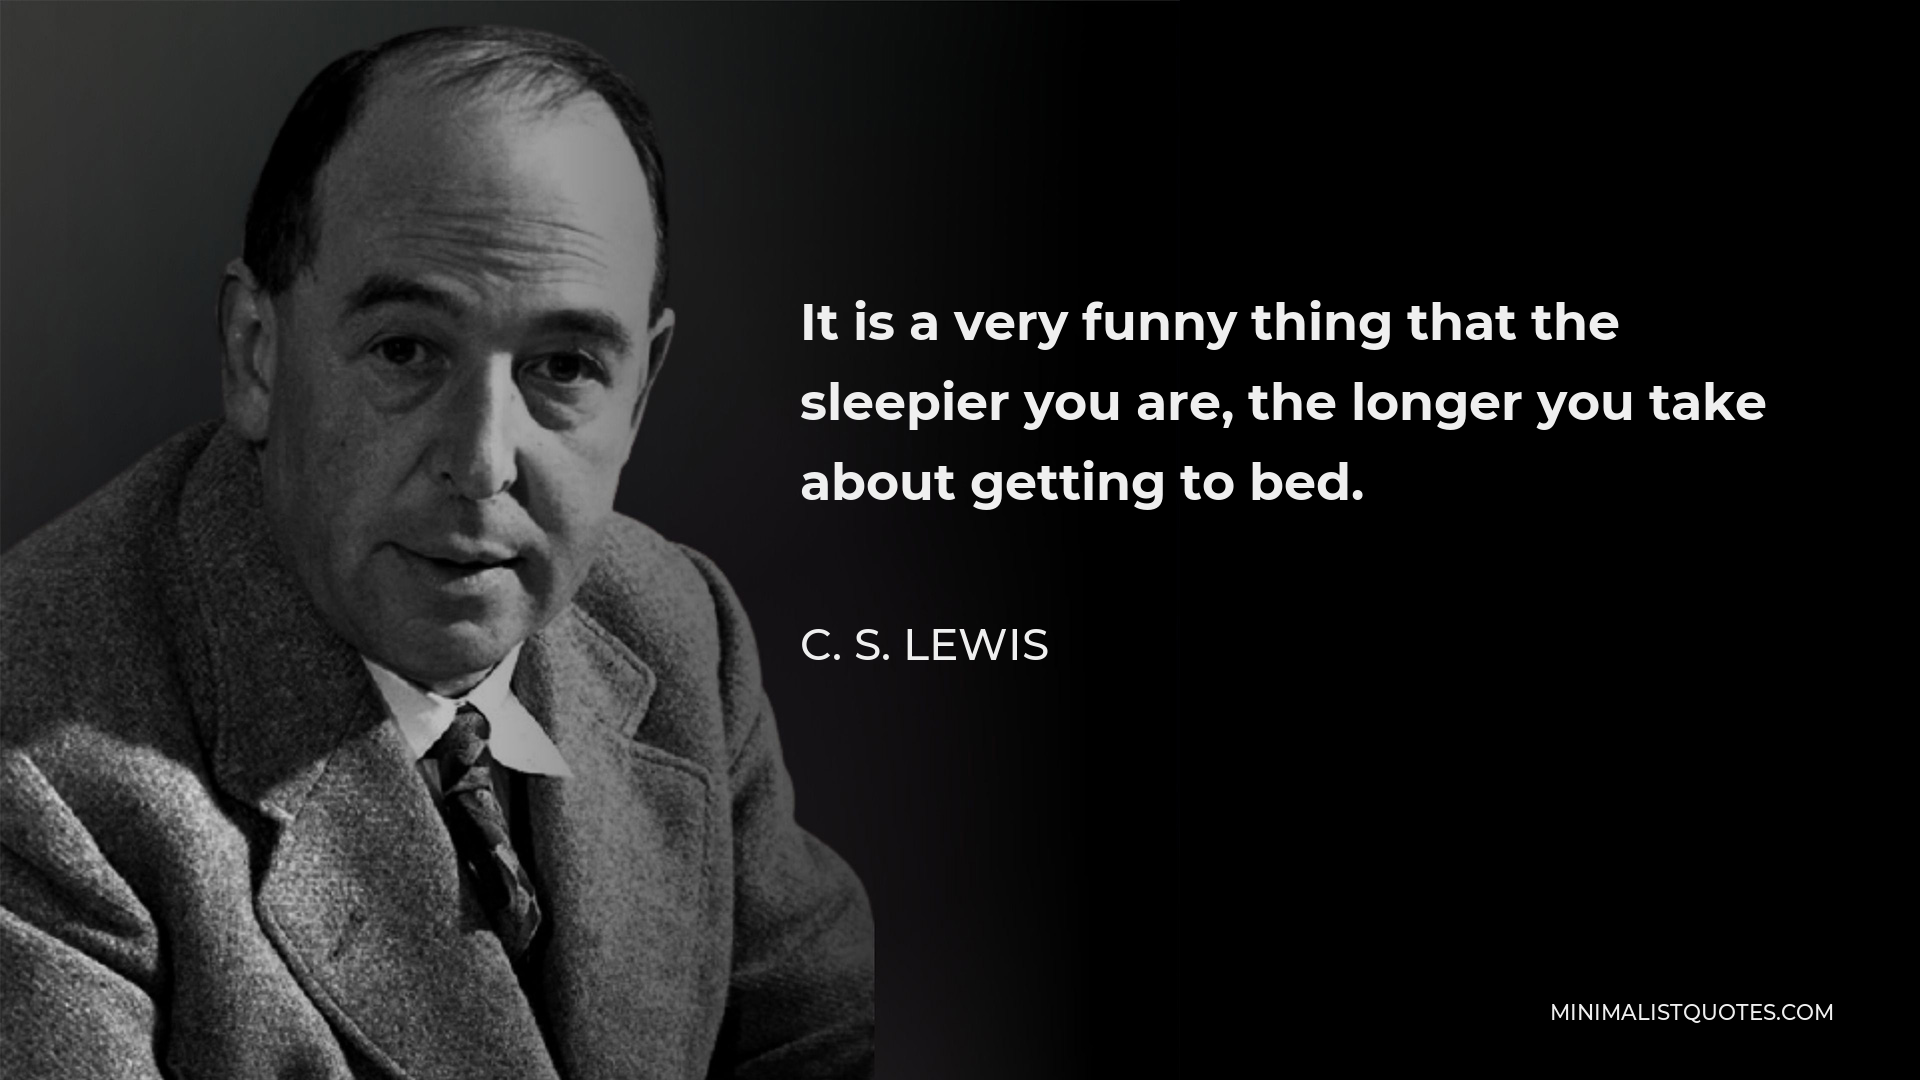 C. S. Lewis Quote - It is a very funny thing that the sleepier you are, the longer you take about getting to bed.